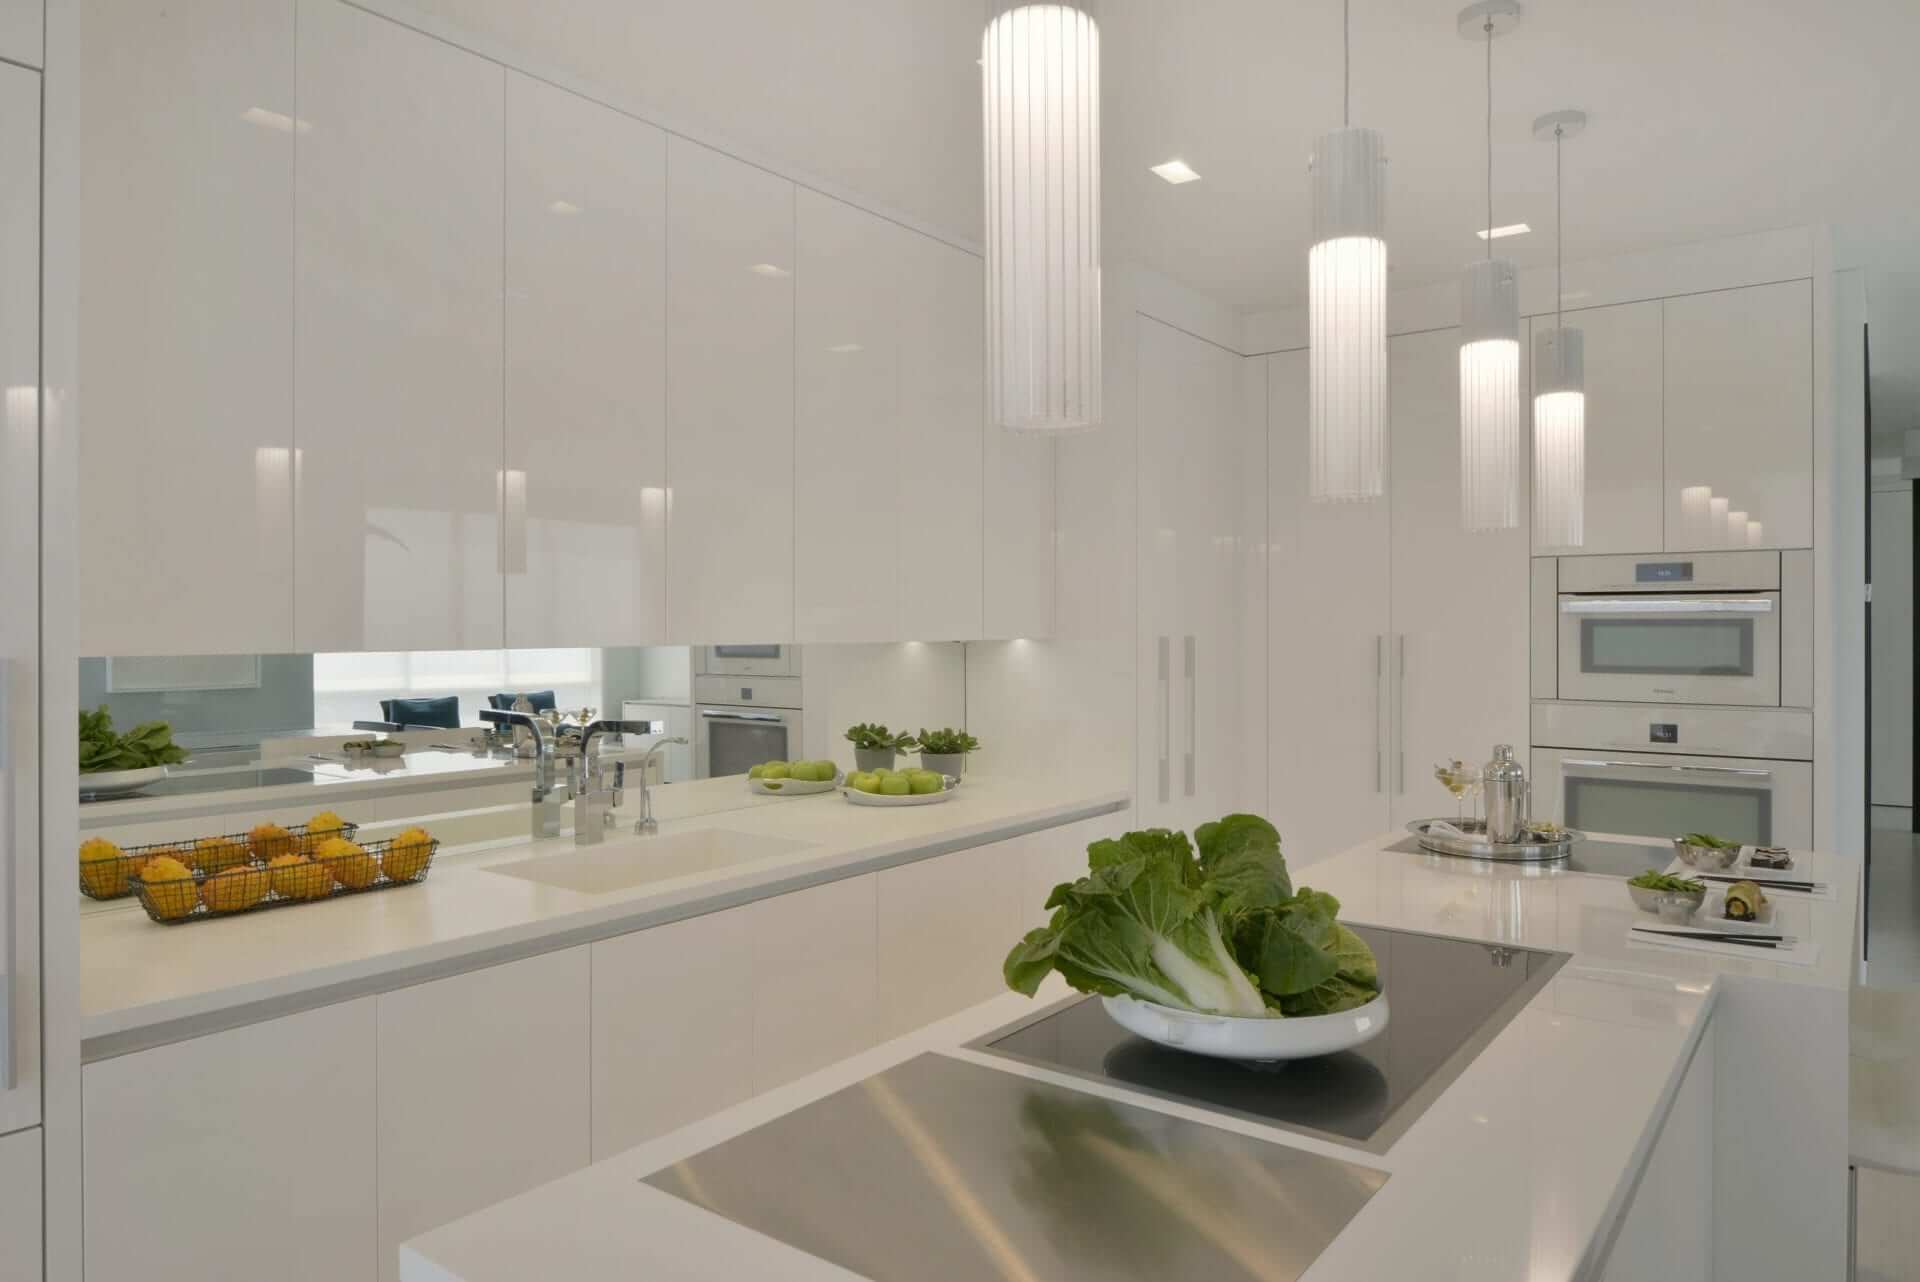 Custom island features white Corian top with waterfall edge, white leather stools and white glass cylinder pendant lights.